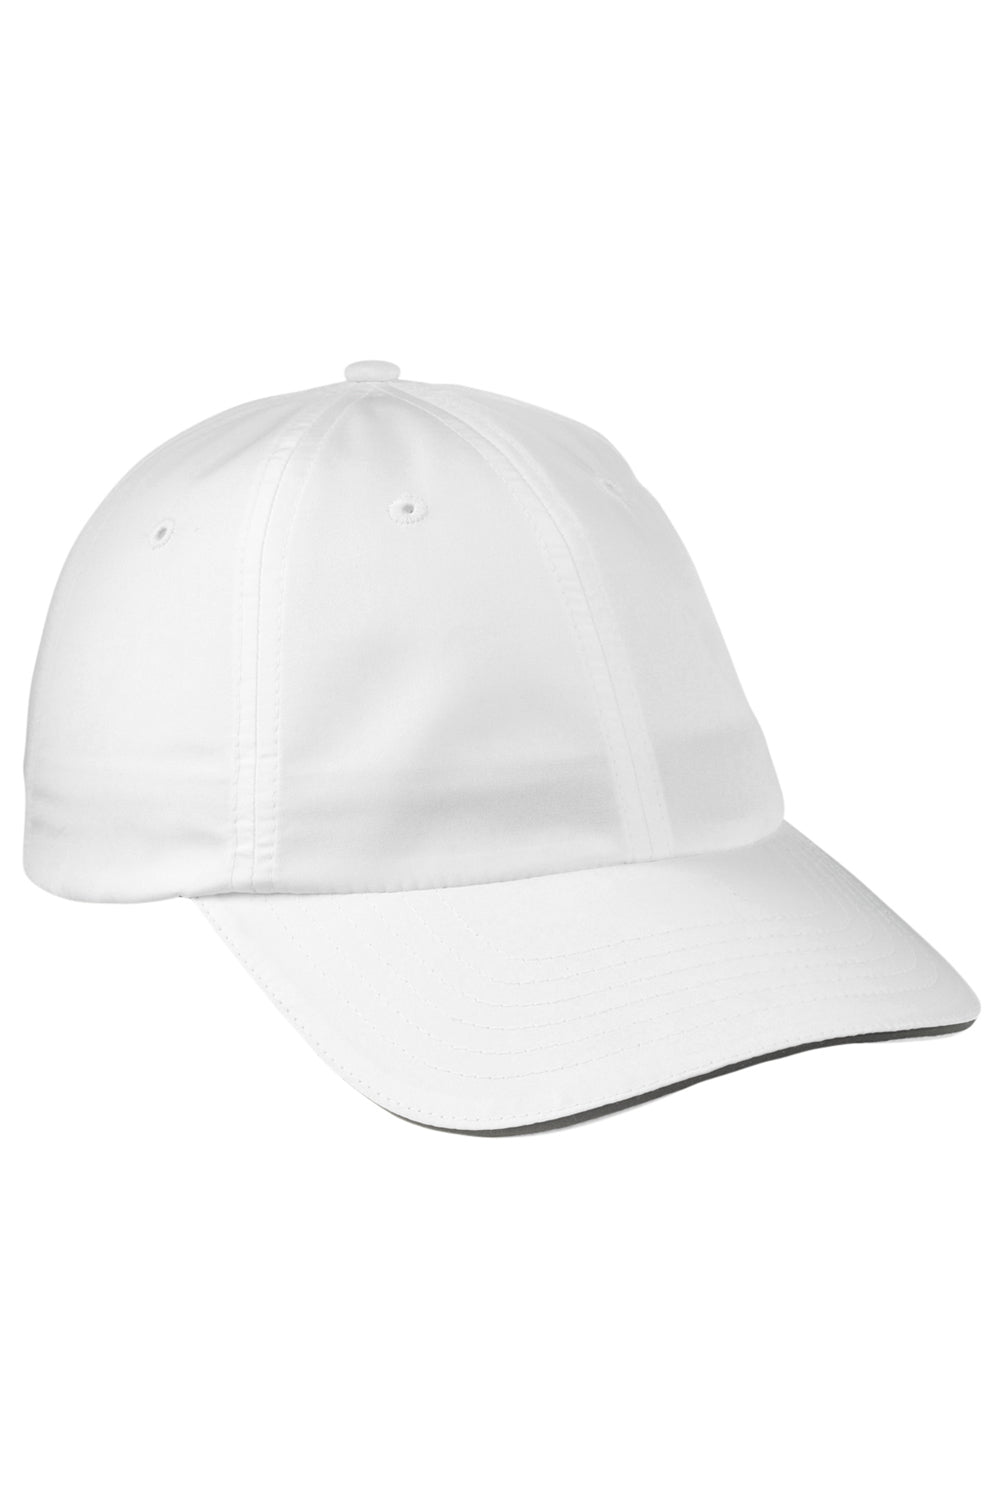 Core 365 CE001 Mens Pitch Performance Moisture Wicking Adjustable Hat White Front